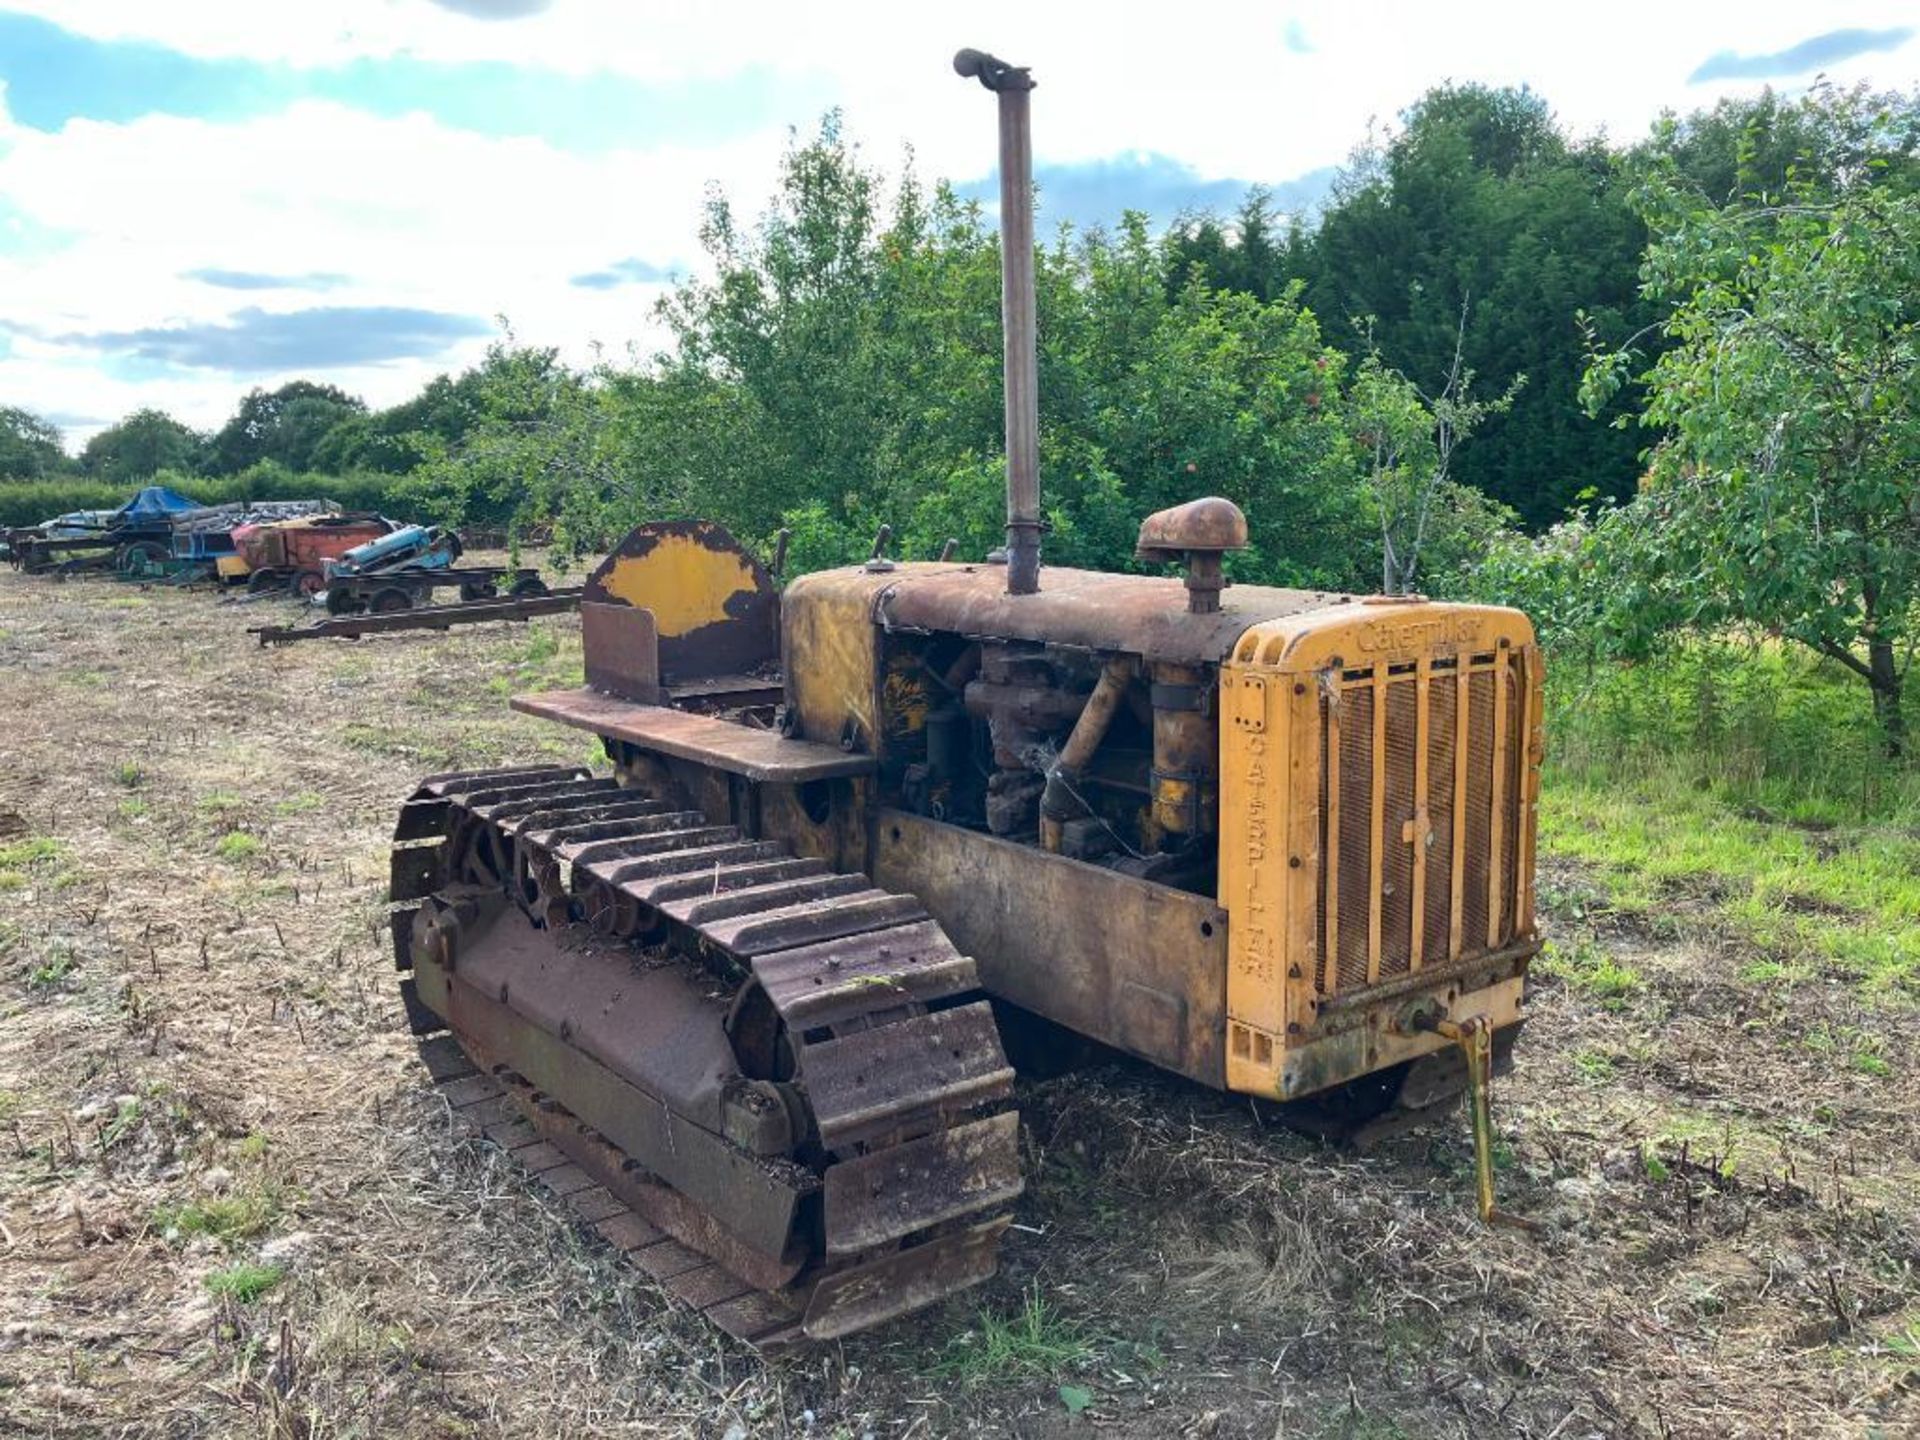 1939 Caterpillar R4 metal tracked crawler with 16" tracks and swinging drawbar. Serial No: 6G1021WS - Image 2 of 14